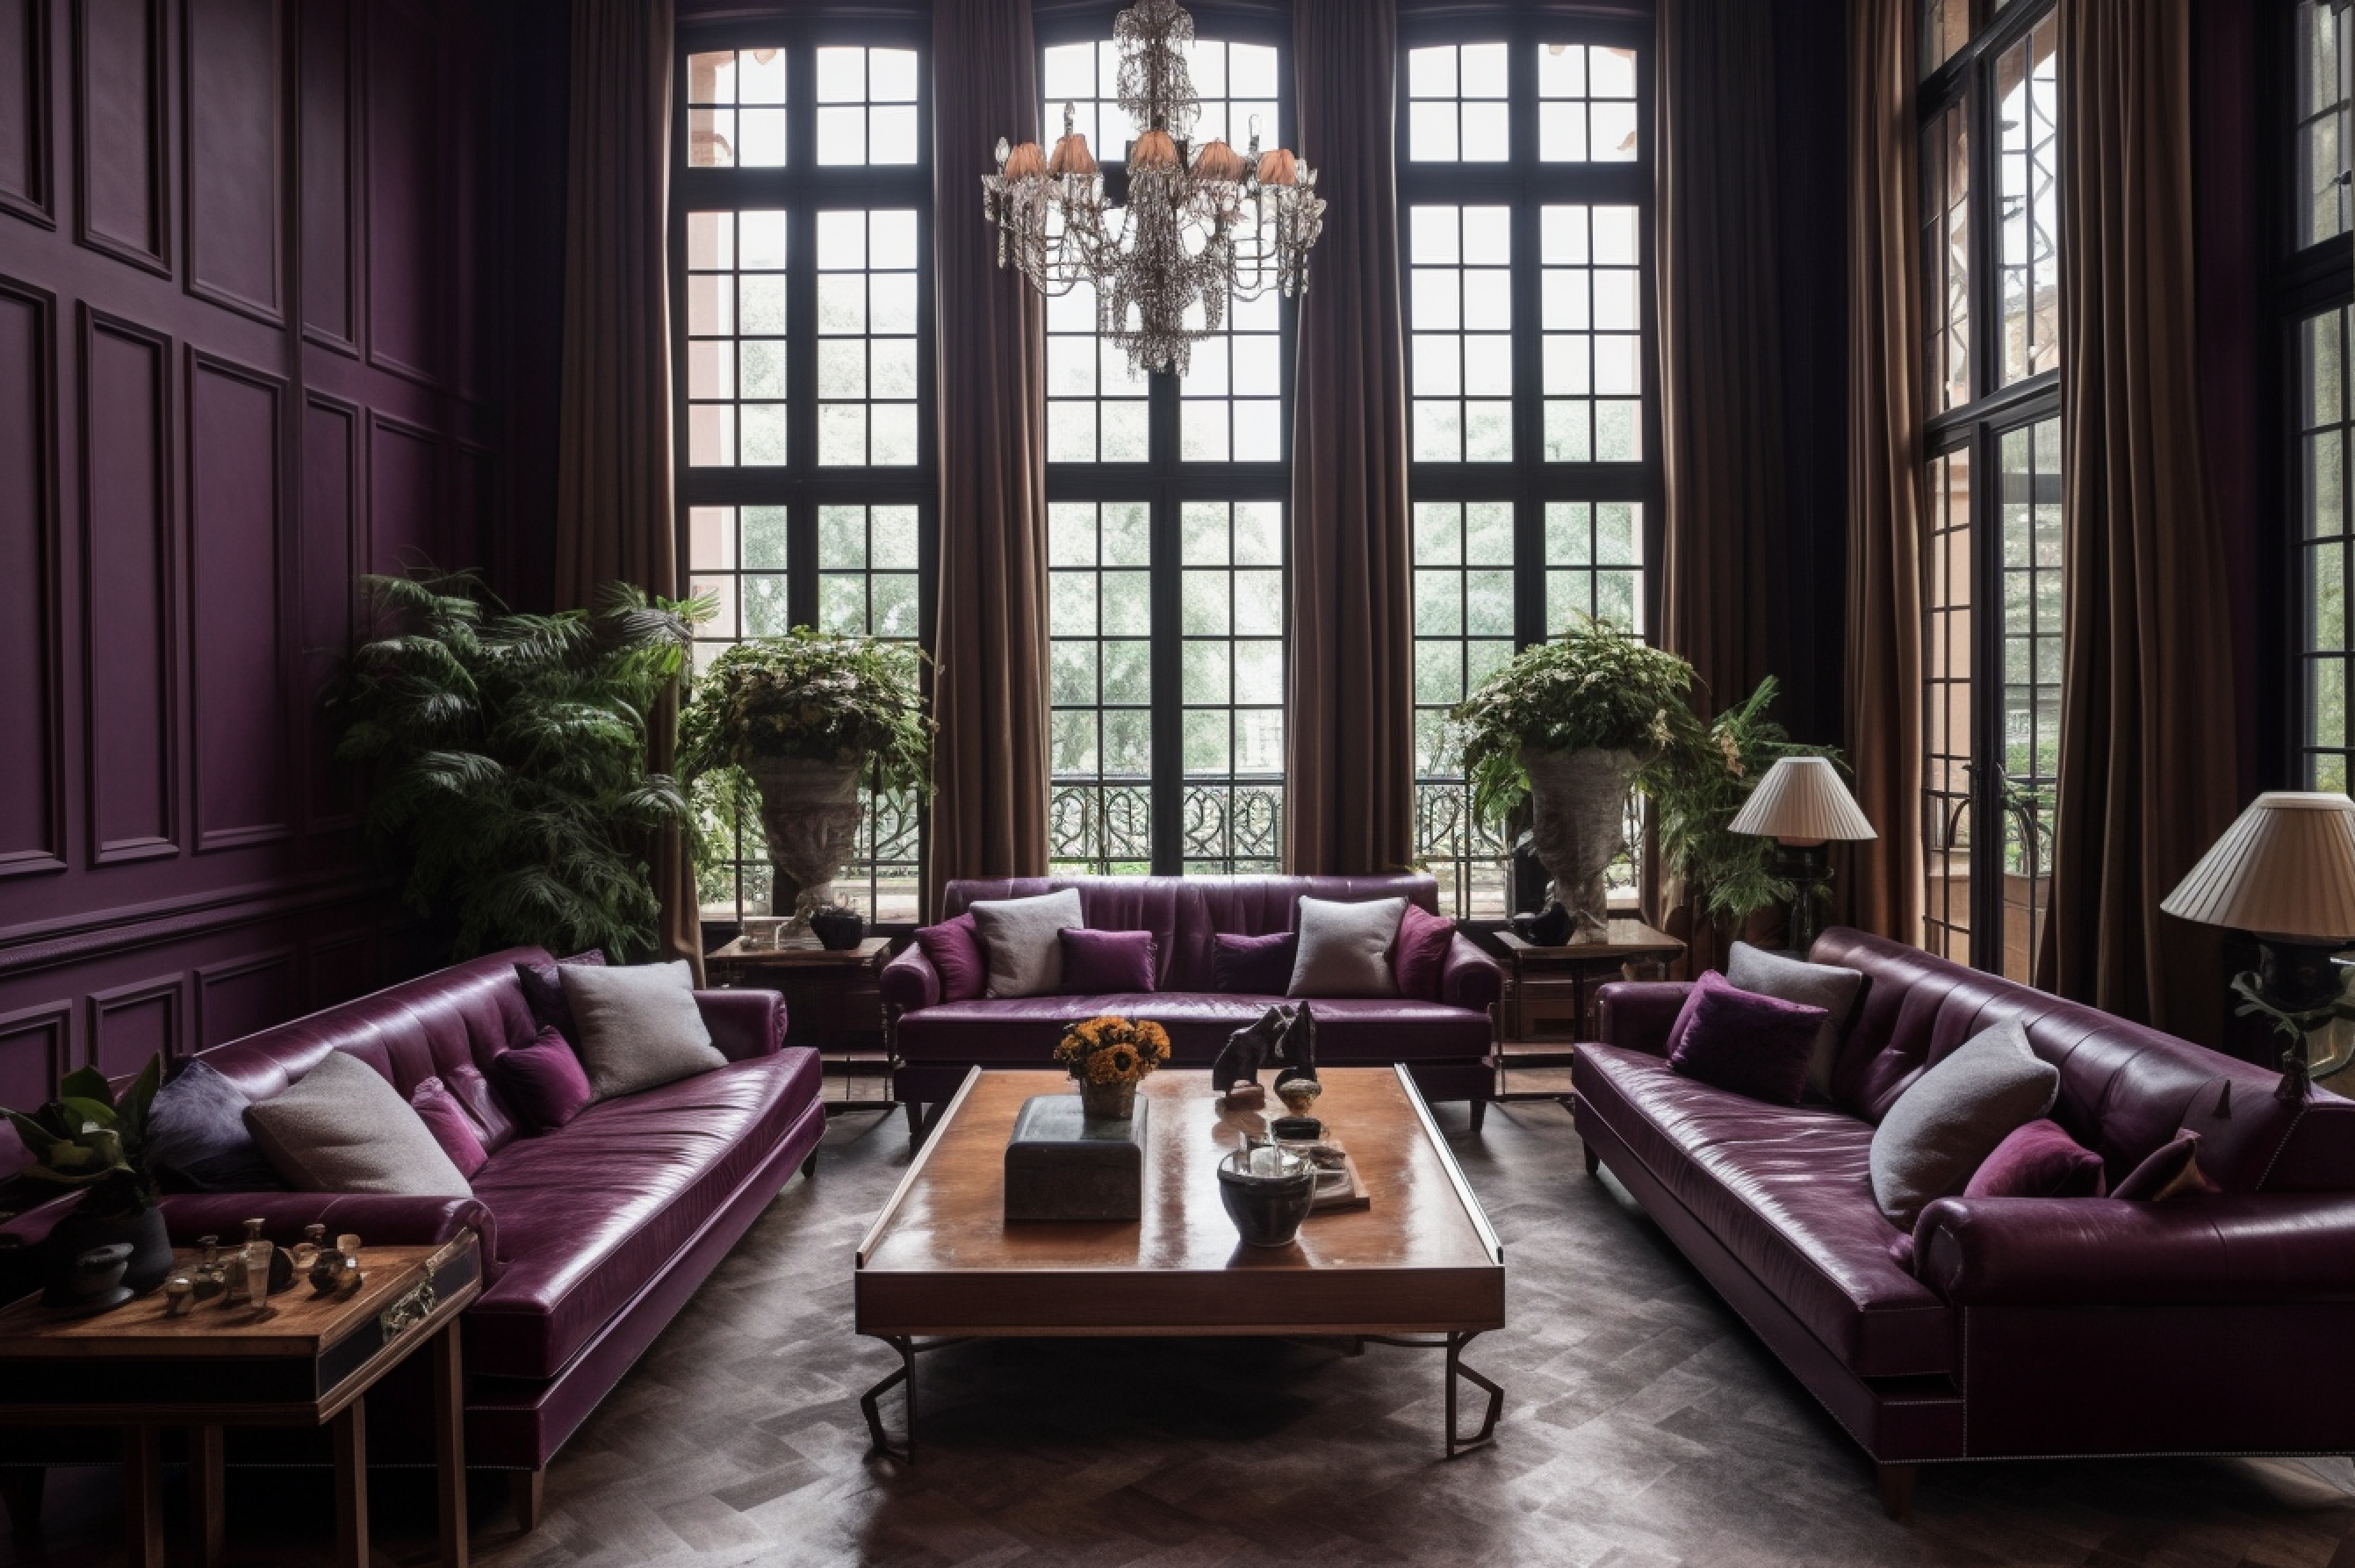 Image displaying a plush living room with walnut brown leather sofas adorned with plum purple cushions.